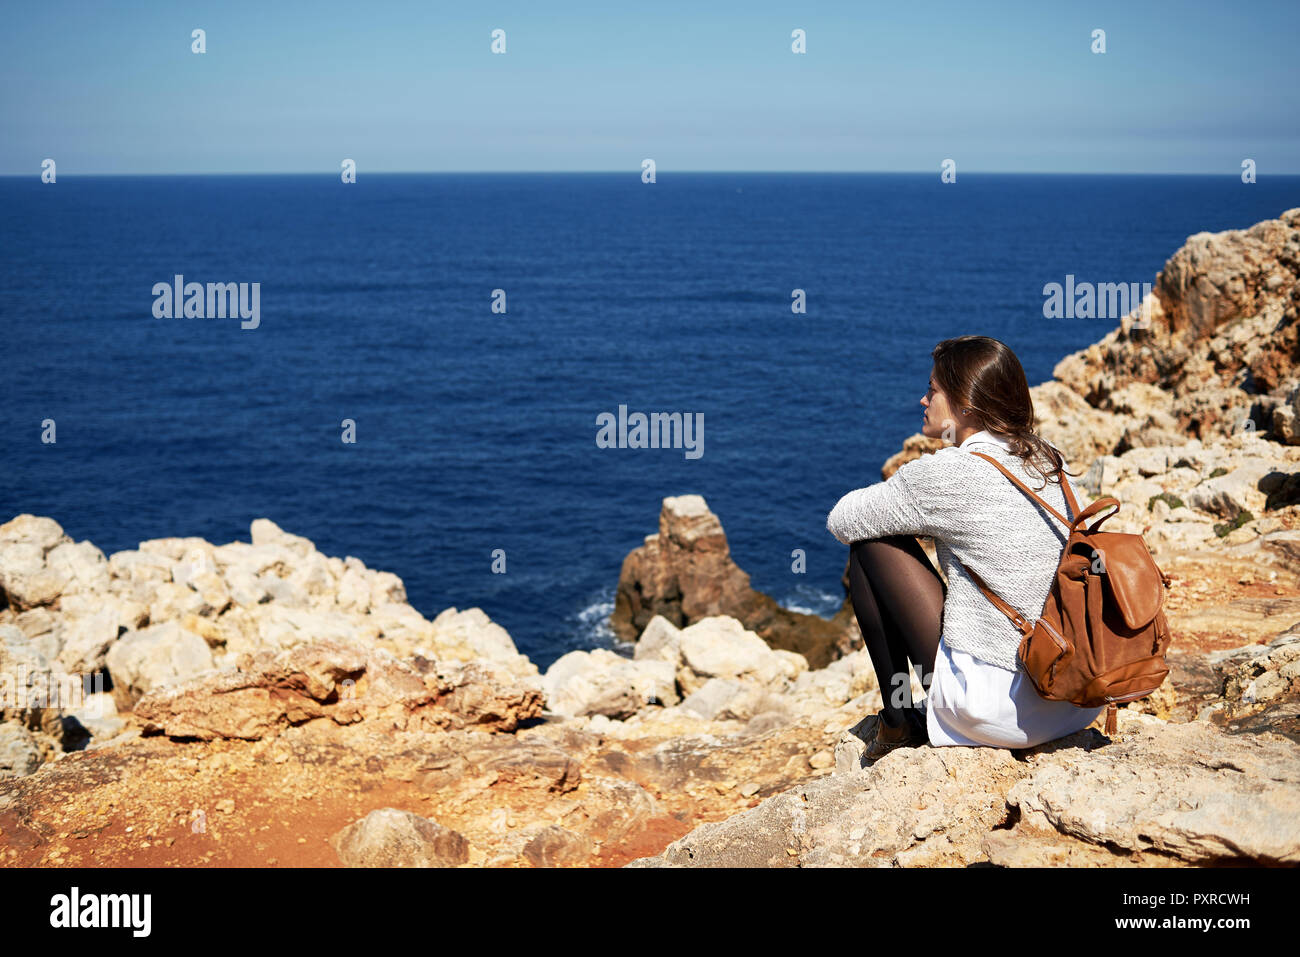 Young brunette woman sitting on coast, looking at view Stock Photo